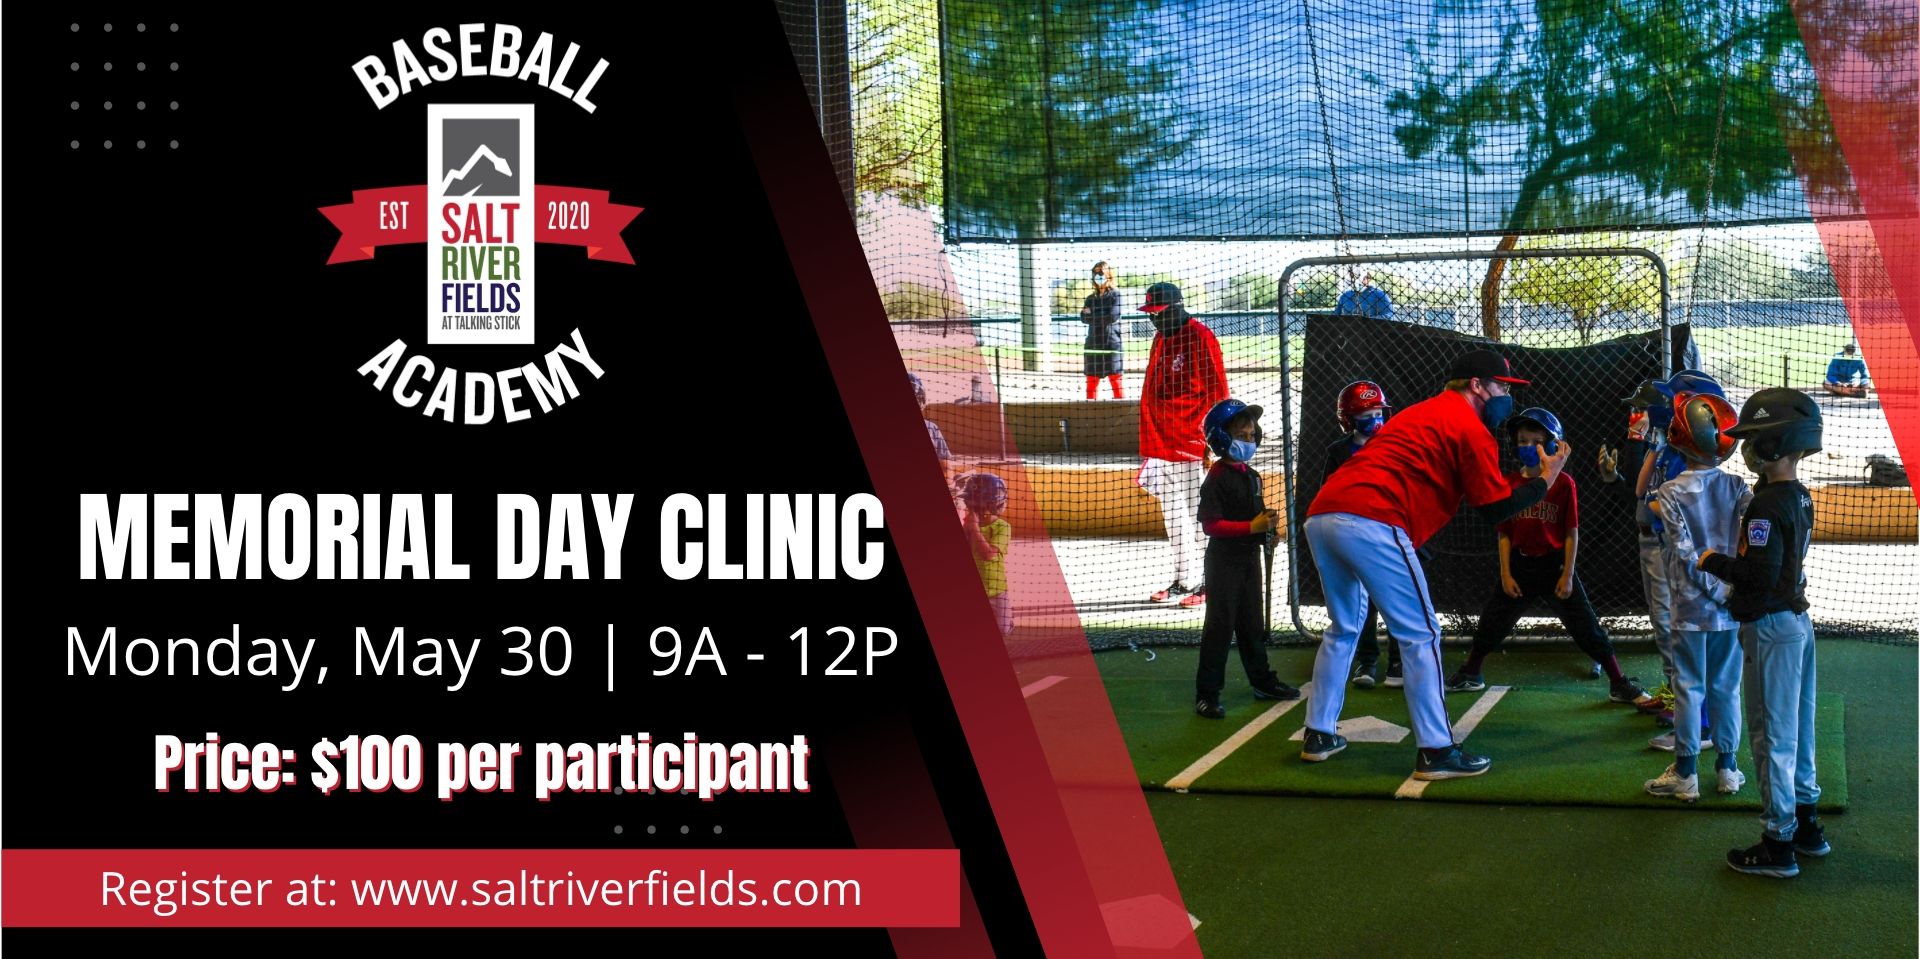 Memorial Day Baseball Clinic promotional image